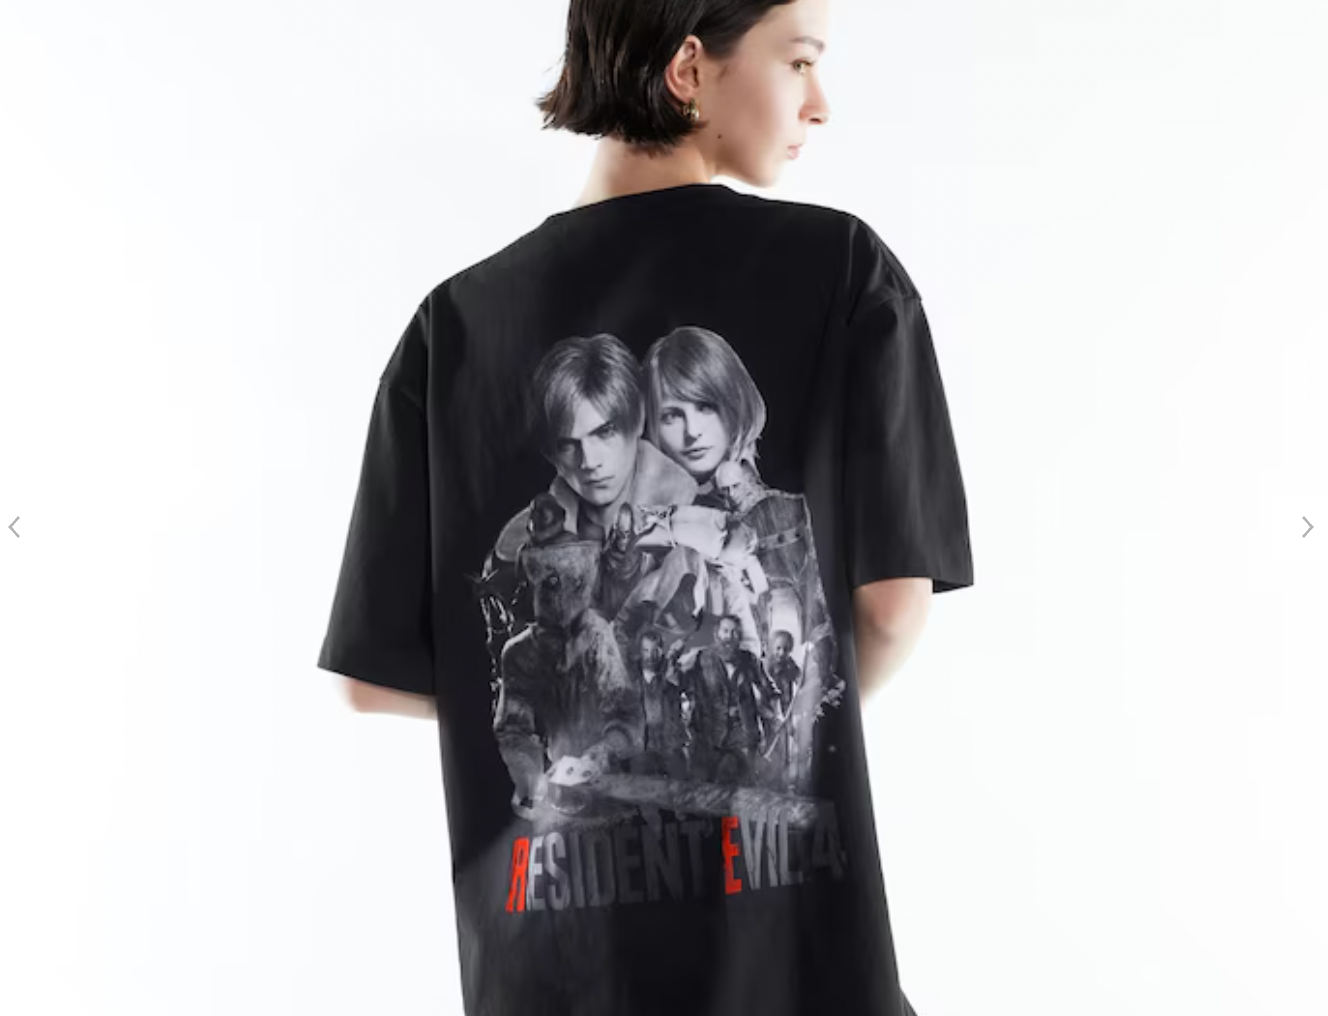 resident-evil-4-uniqlo-shirt.png